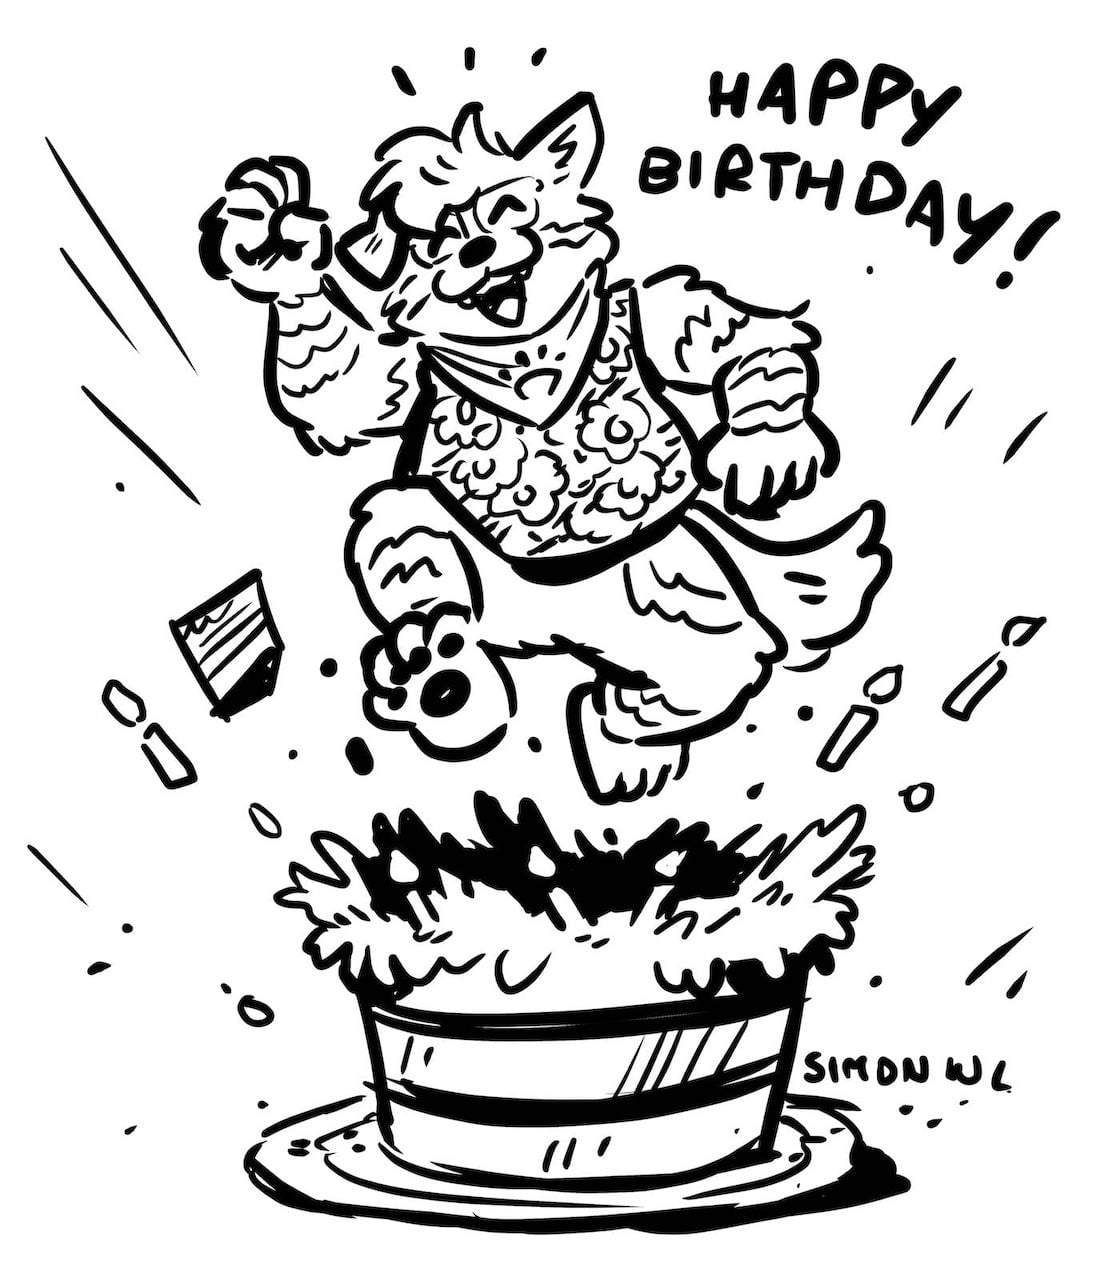 A sketch of Bowie popping out of a birthday cake, with the text Happy Birthday at the top of the sketch